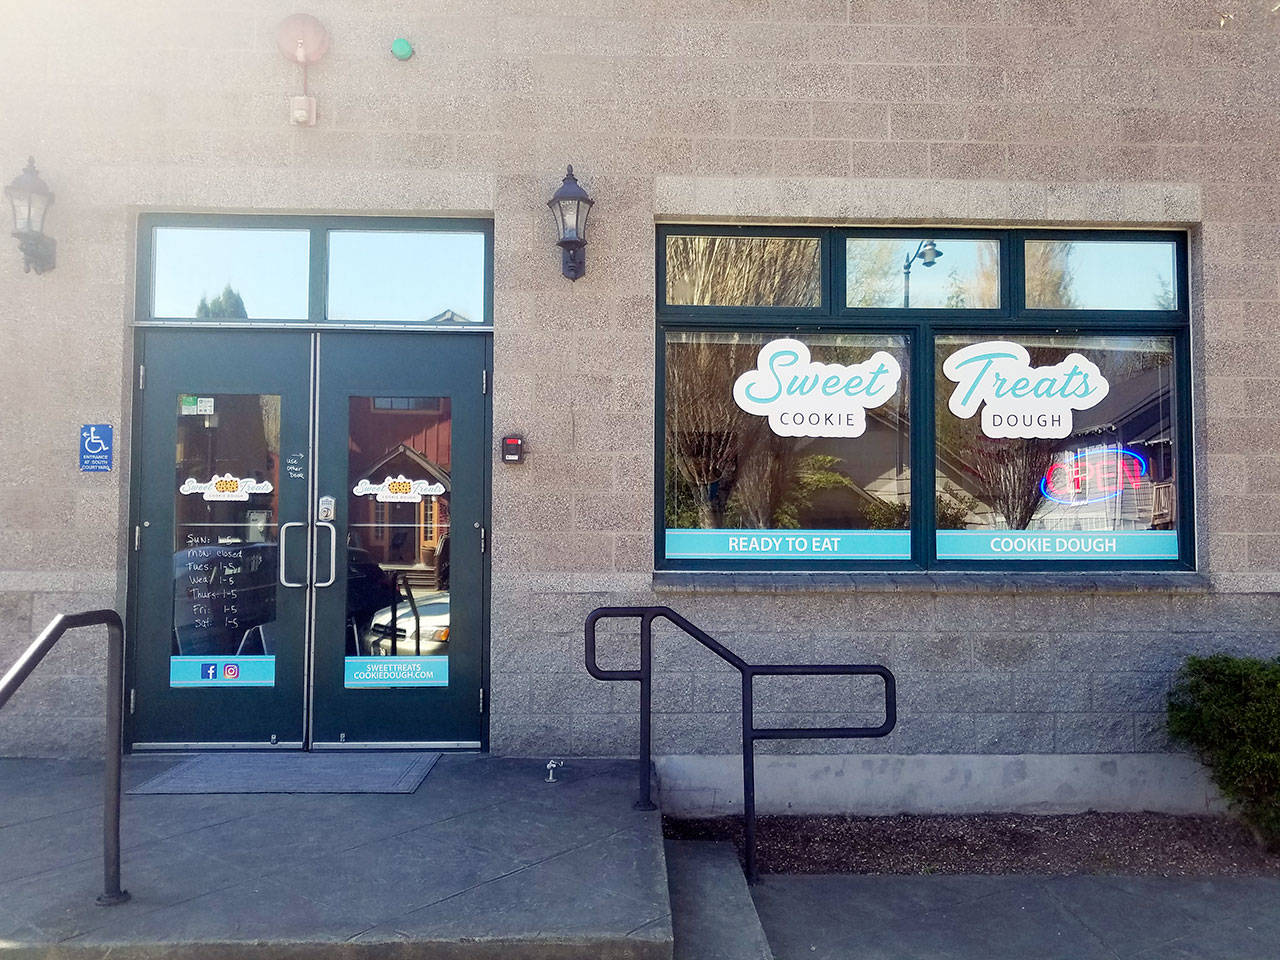 Stacey Anderson originally wanted to run a Sweet Treats food truck, but the space allowed for a small storefront where she now sells cookie dough by the scoop, along with other treats. Courtesy photo